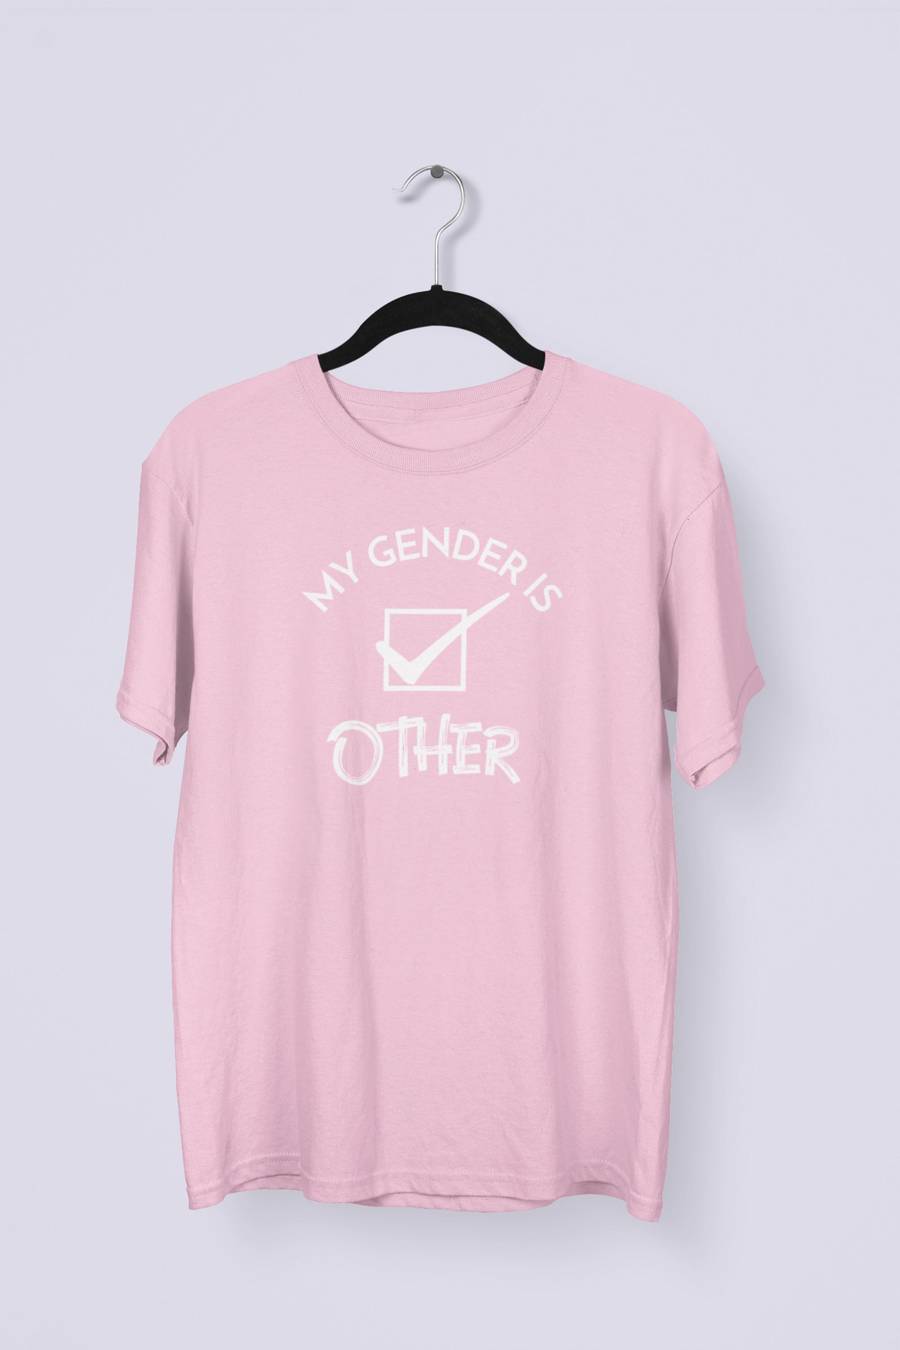 My Gender is Other T-shirt - Light Pink